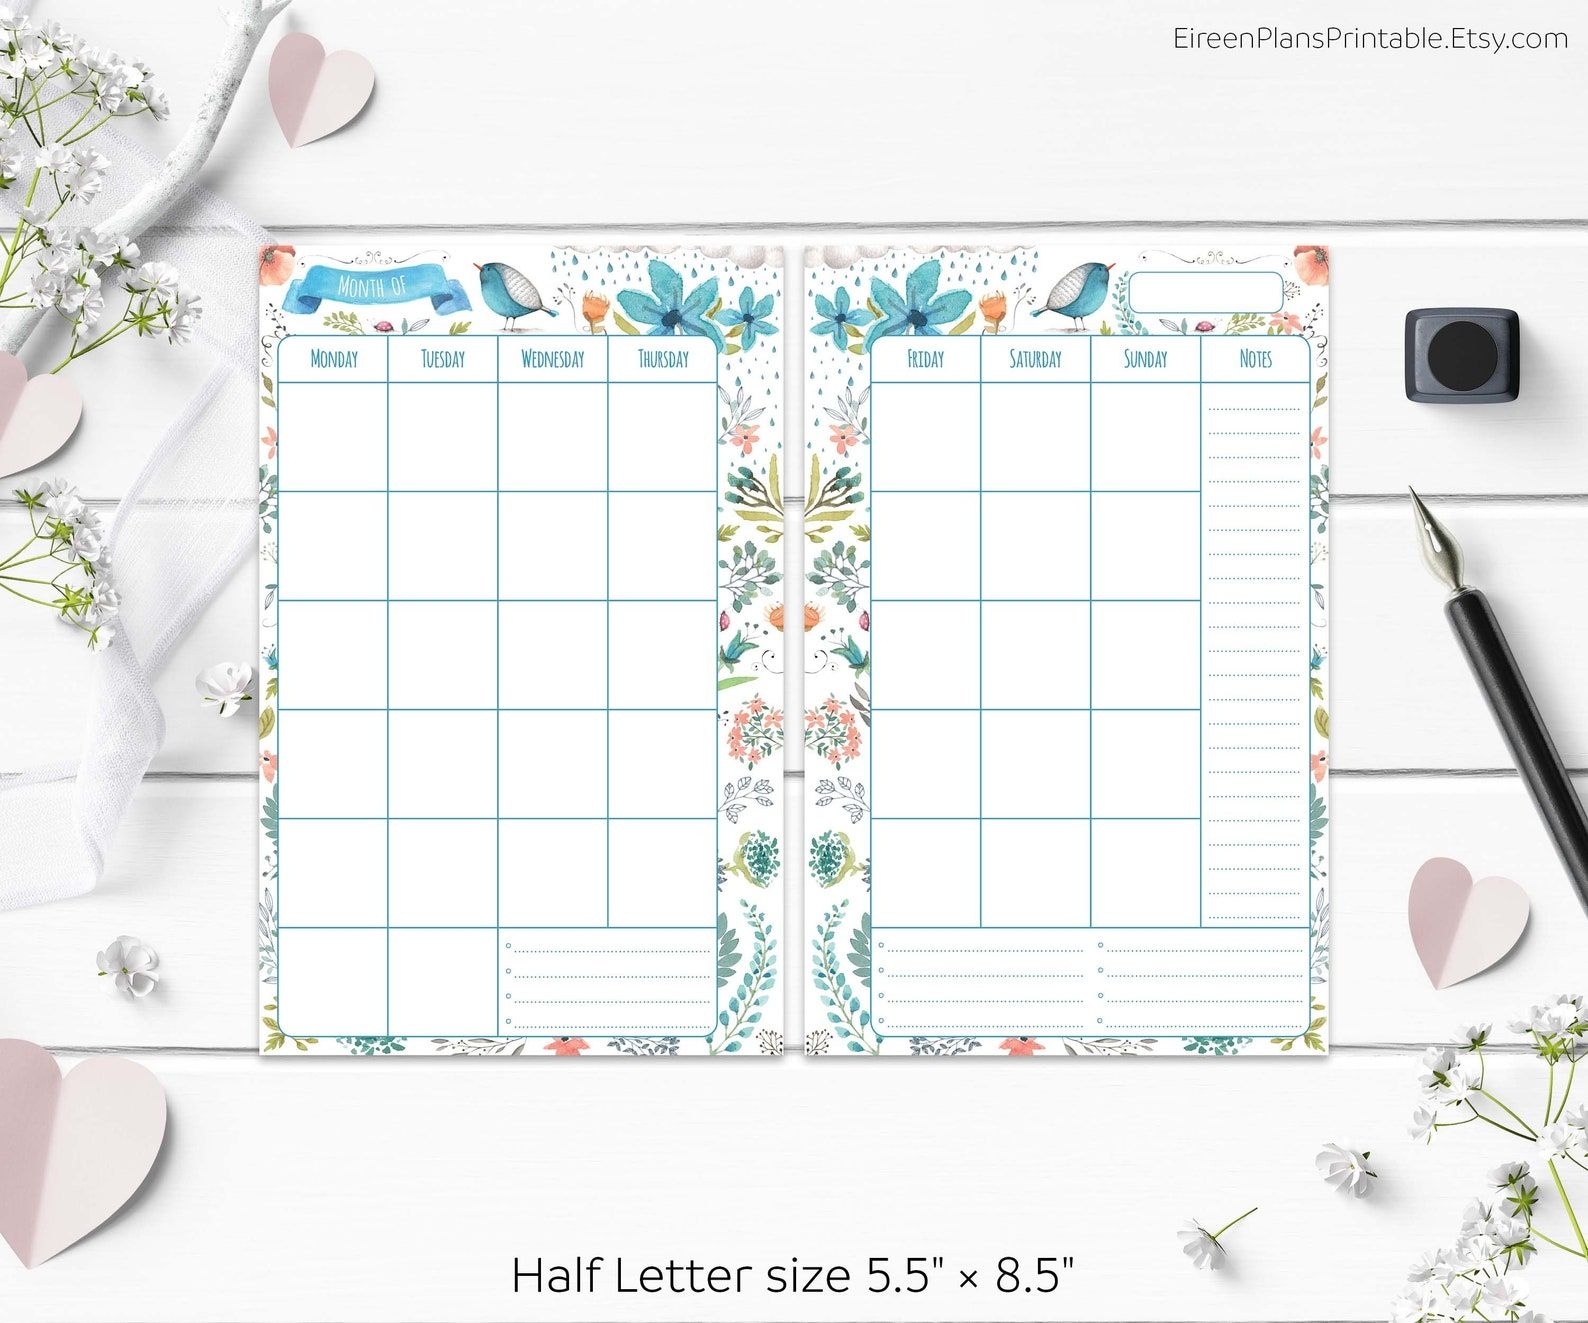 5 5 x 8 5 undated monthly planner printable refill